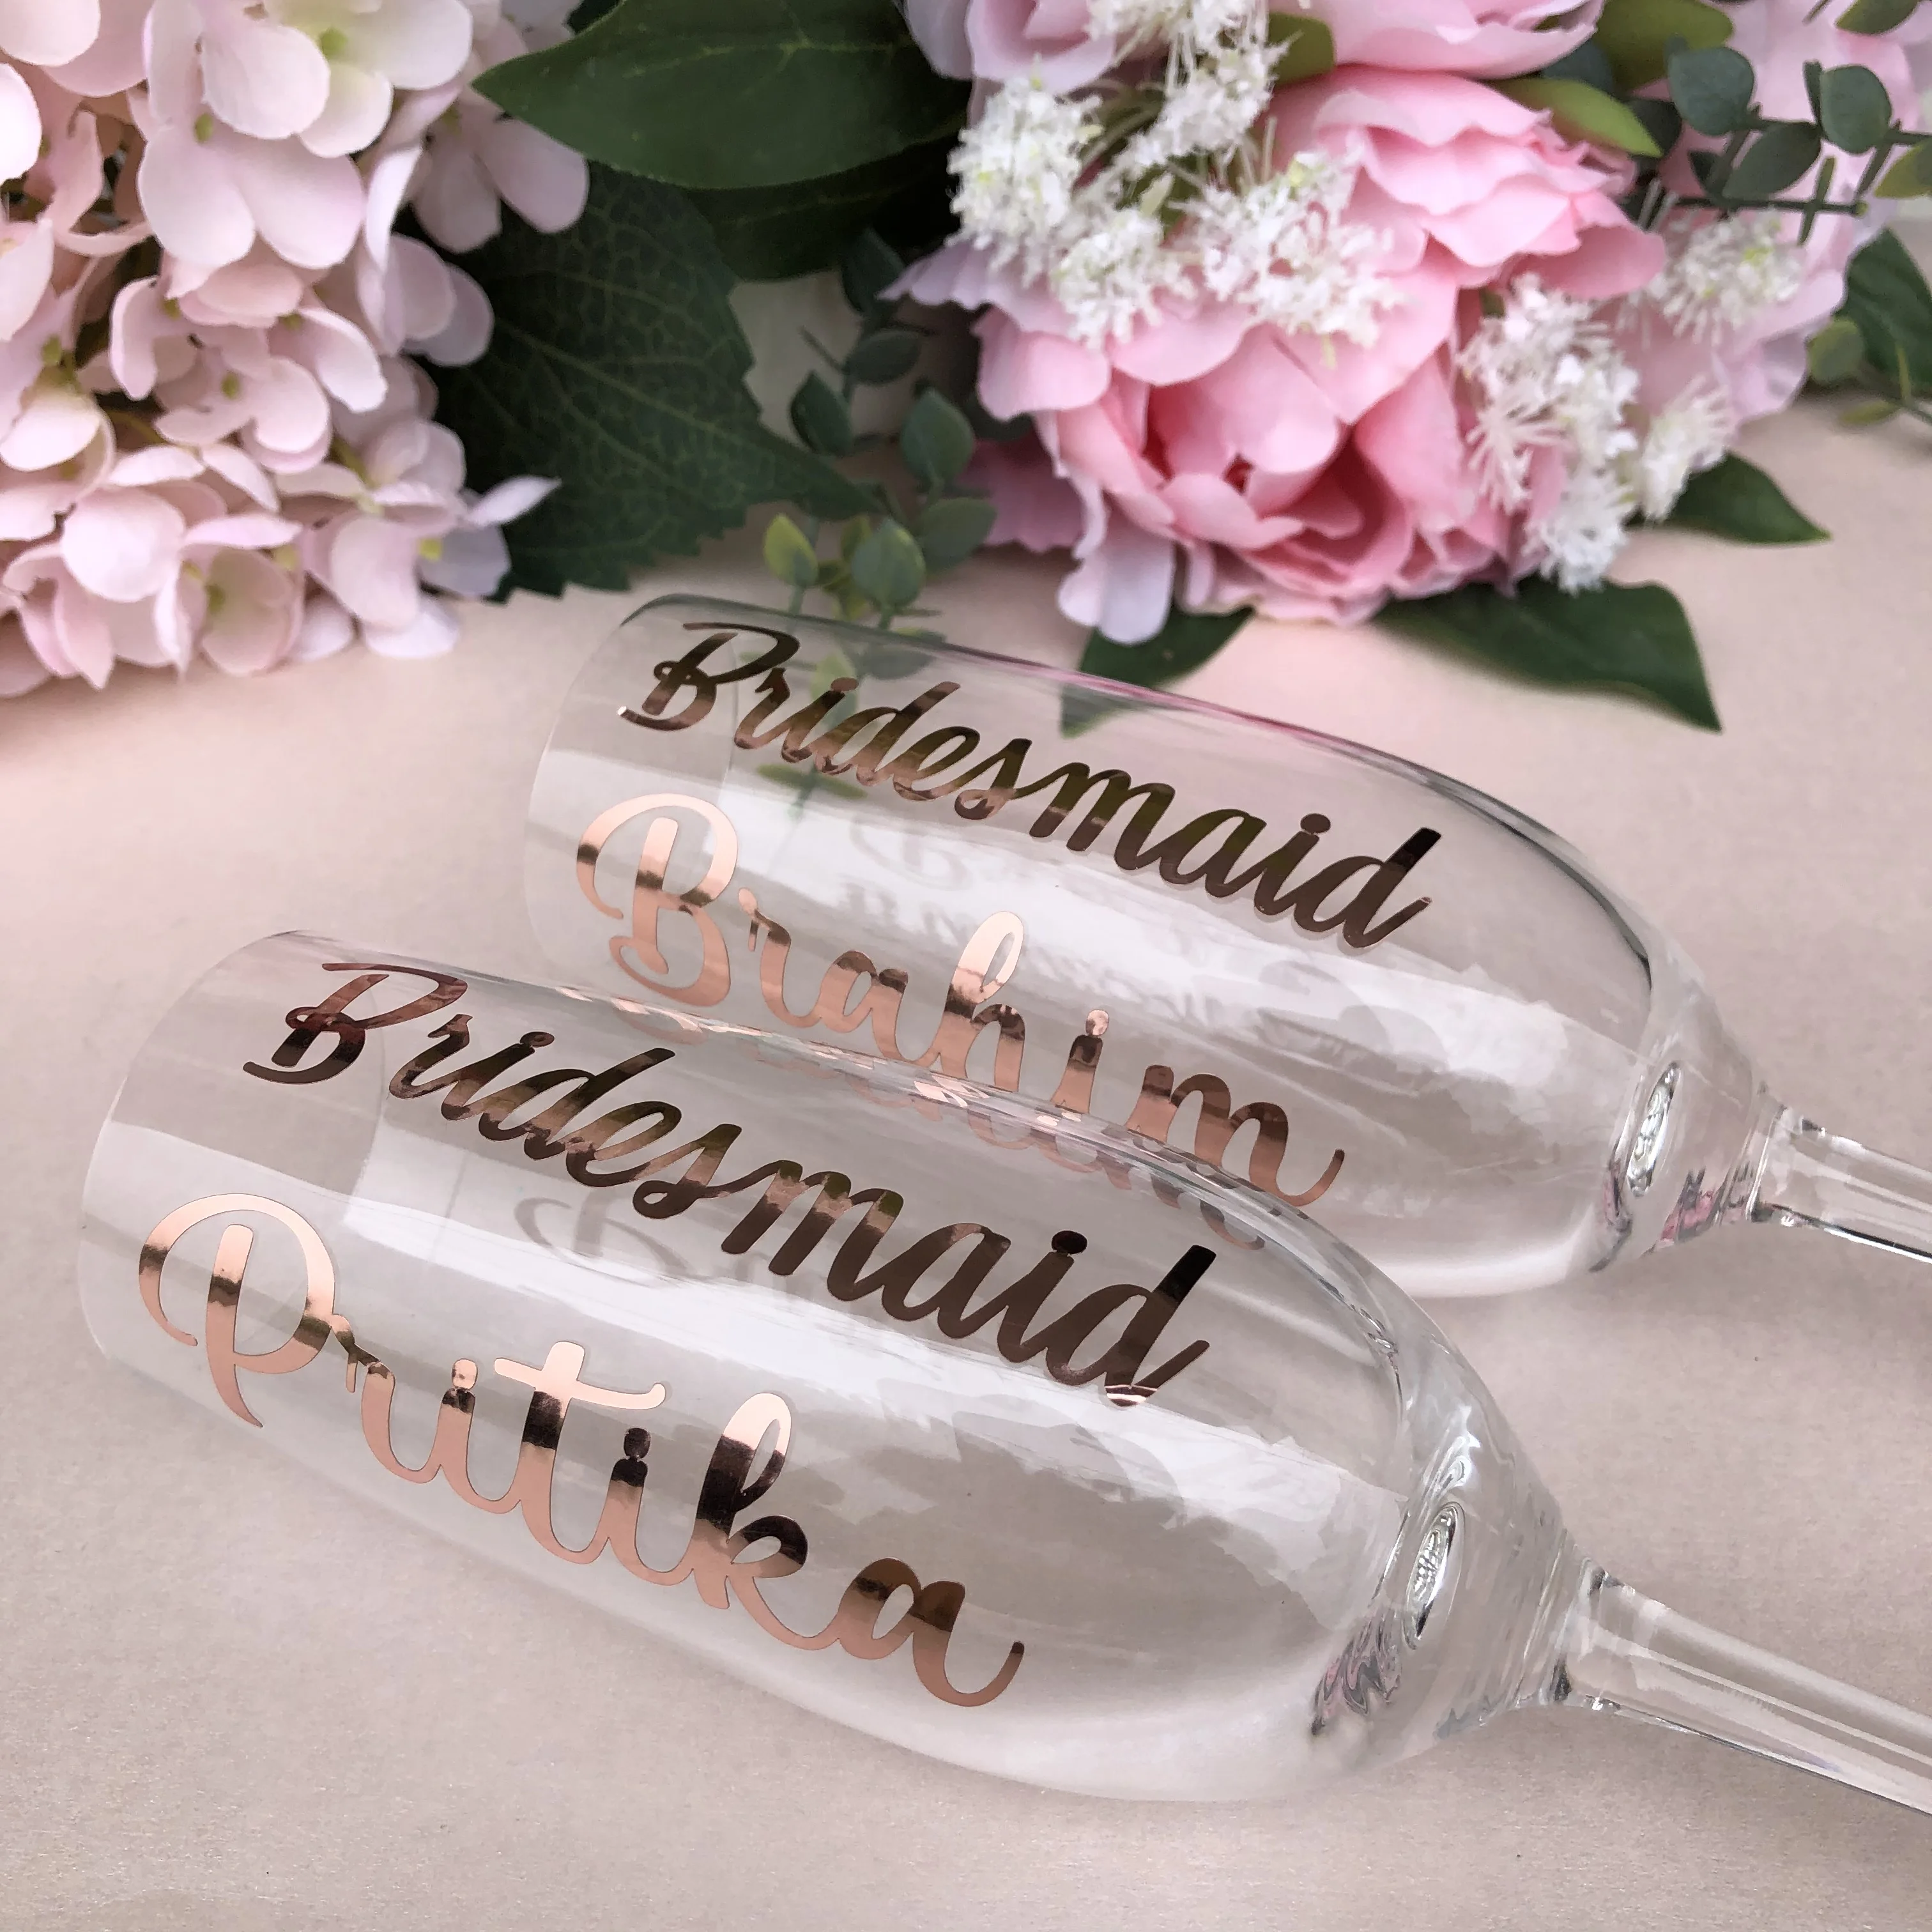 Personalised Vinyl Stickers discounted for Champagne Flutes/Bride/Bridesmaid 